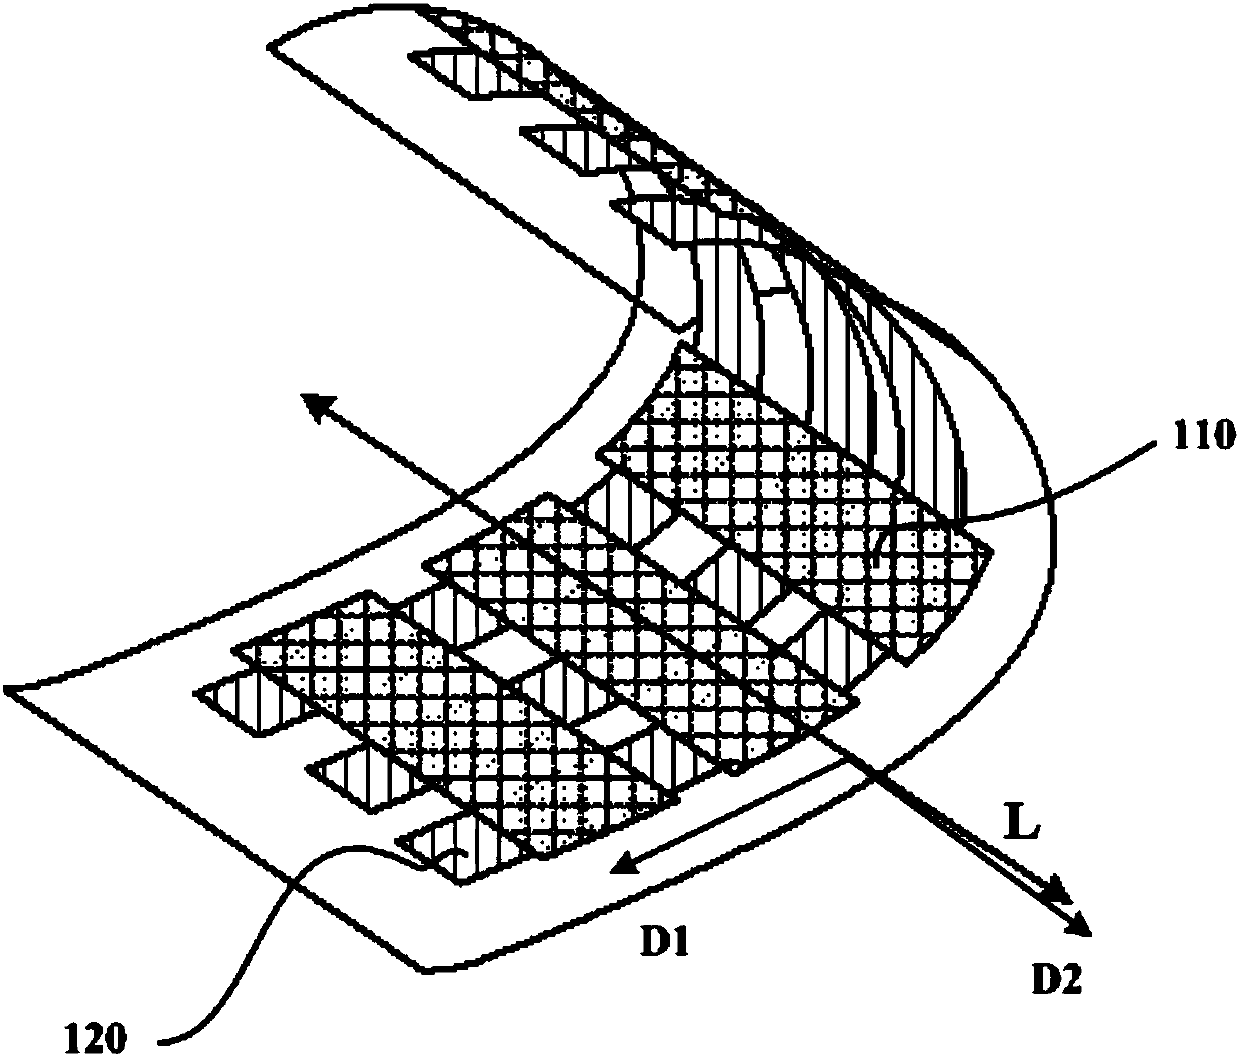 Flexible touch sensor and flexible touch display device